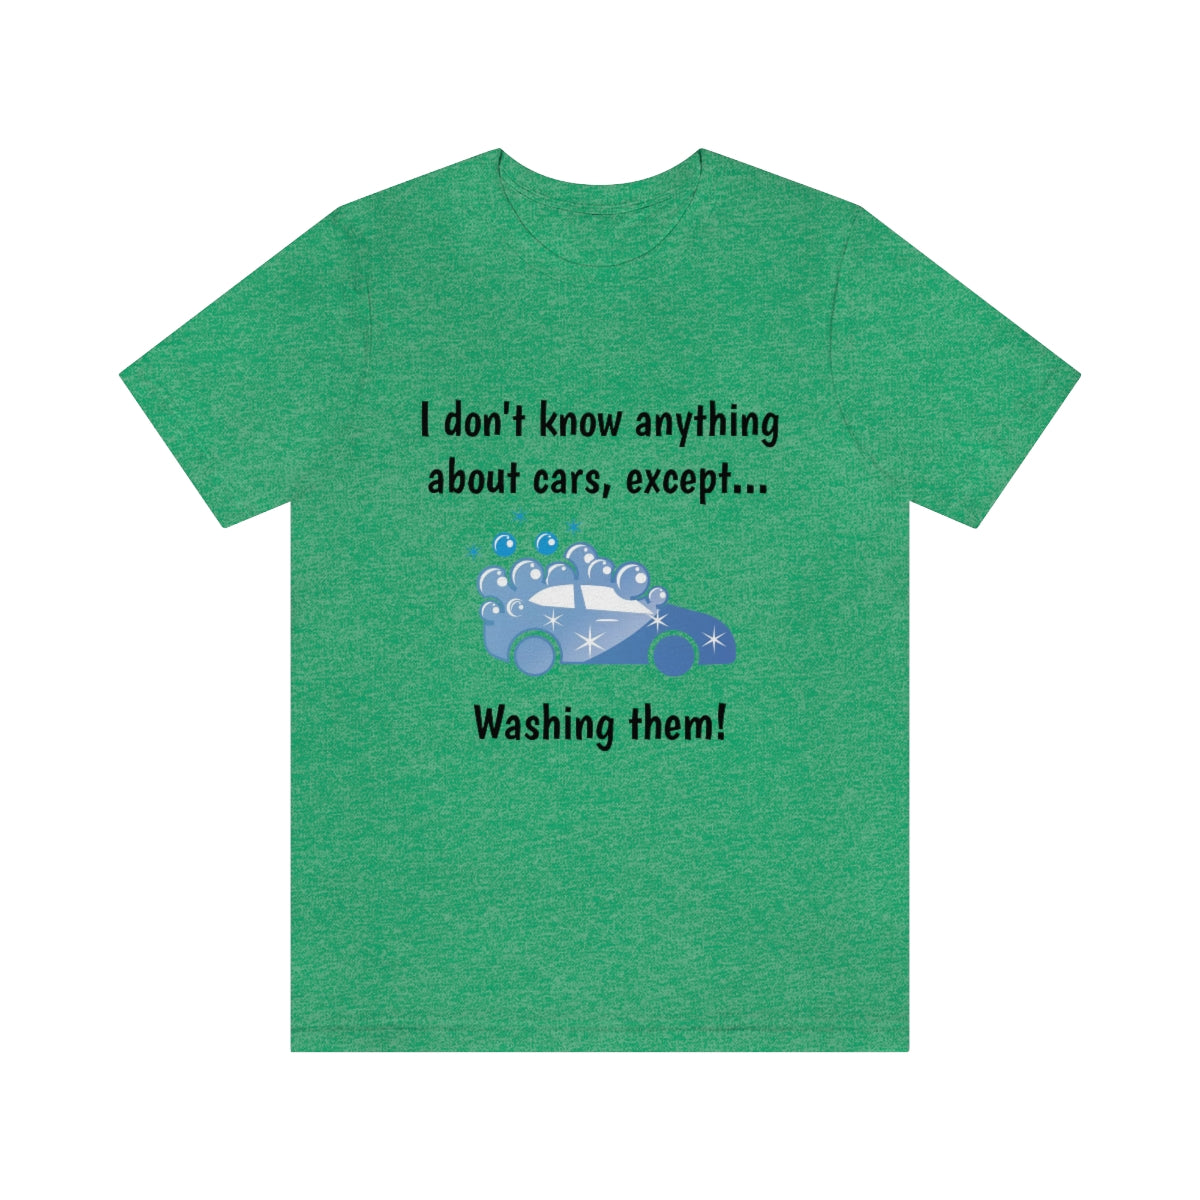 I don't know anything about cars... Funny Unisex Short Sleeve Tee - CrazyTomTShirts